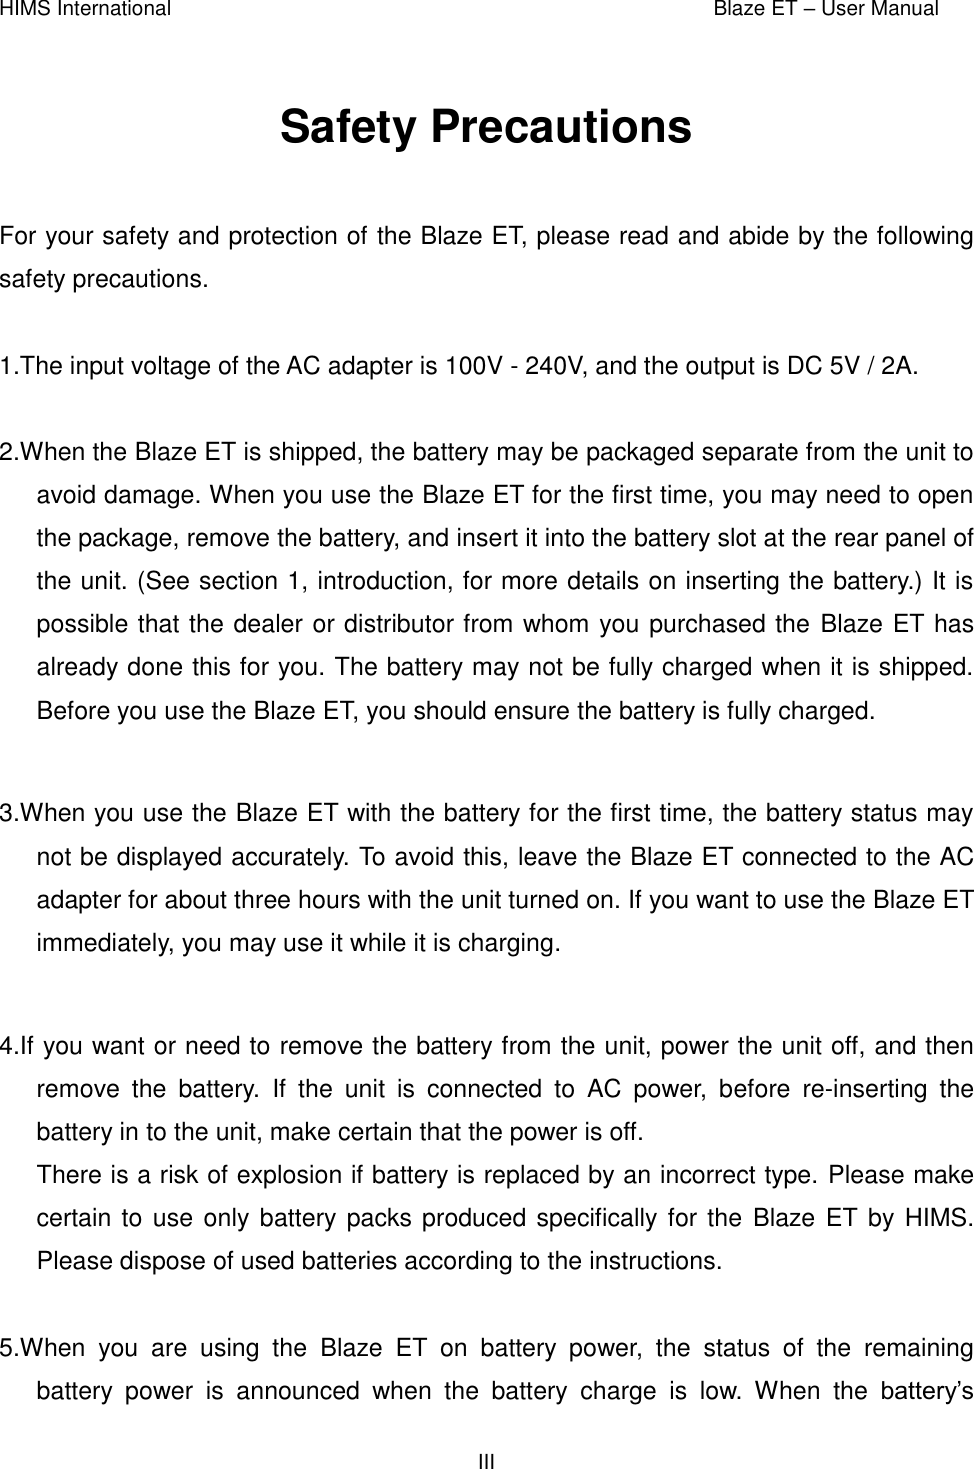 HIMS International    Blaze ET – User Manual      III  Safety Precautions  For your safety and protection of the Blaze ET, please read and abide by the following safety precautions.  1.The input voltage of the AC adapter is 100V - 240V, and the output is DC 5V / 2A.  2.When the Blaze ET is shipped, the battery may be packaged separate from the unit to avoid damage. When you use the Blaze ET for the first time, you may need to open the package, remove the battery, and insert it into the battery slot at the rear panel of the unit. (See section 1, introduction, for more details on inserting the battery.) It is possible that the dealer or distributor from whom you purchased the Blaze ET has already done this for you. The battery may not be fully charged when it is shipped. Before you use the Blaze ET, you should ensure the battery is fully charged.  3.When you use the Blaze ET with the battery for the first time, the battery status may not be displayed accurately. To avoid this, leave the Blaze ET connected to the AC adapter for about three hours with the unit turned on. If you want to use the Blaze ET immediately, you may use it while it is charging.  4.If you want or need to remove the battery from the unit, power the unit off, and then remove  the  battery.  If  the  unit  is  connected  to  AC  power,  before  re-inserting  the battery in to the unit, make certain that the power is off. There is a risk of explosion if battery is replaced by an incorrect type. Please make certain to use only battery packs produced specifically for the  Blaze ET by HIMS. Please dispose of used batteries according to the instructions.  5.When  you  are  using  the  Blaze  ET  on  battery  power,  the  status  of  the  remaining battery  power  is  announced  when  the  battery  charge  is  low.  When  the  battery’s 